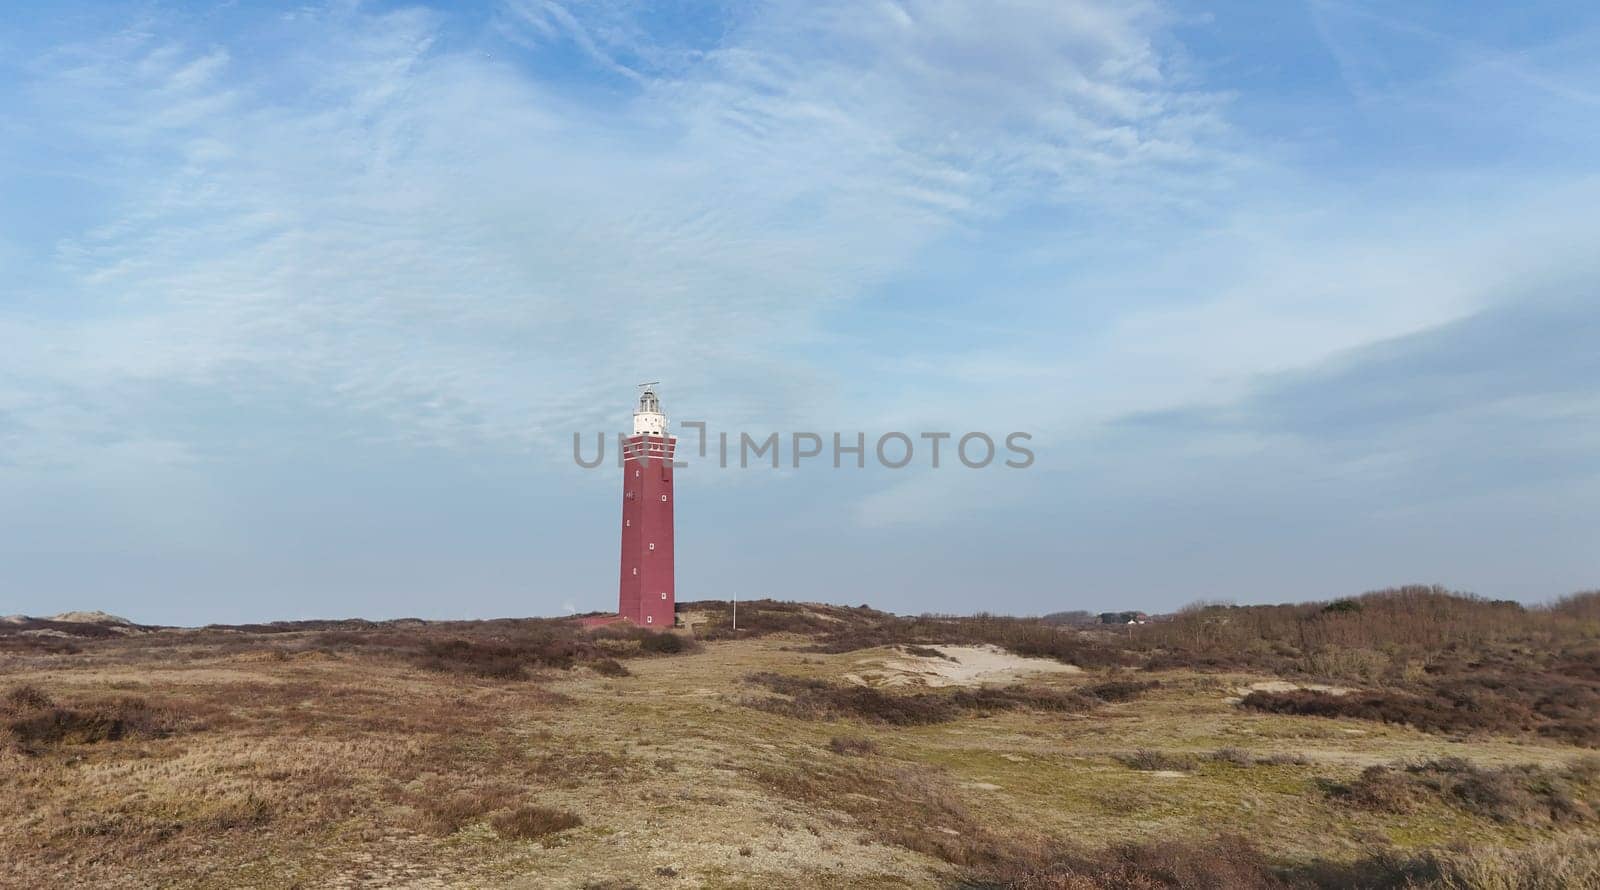 Drone picture of Ouddorp lighthouse in Holland with surrounding dunes in the netherlands